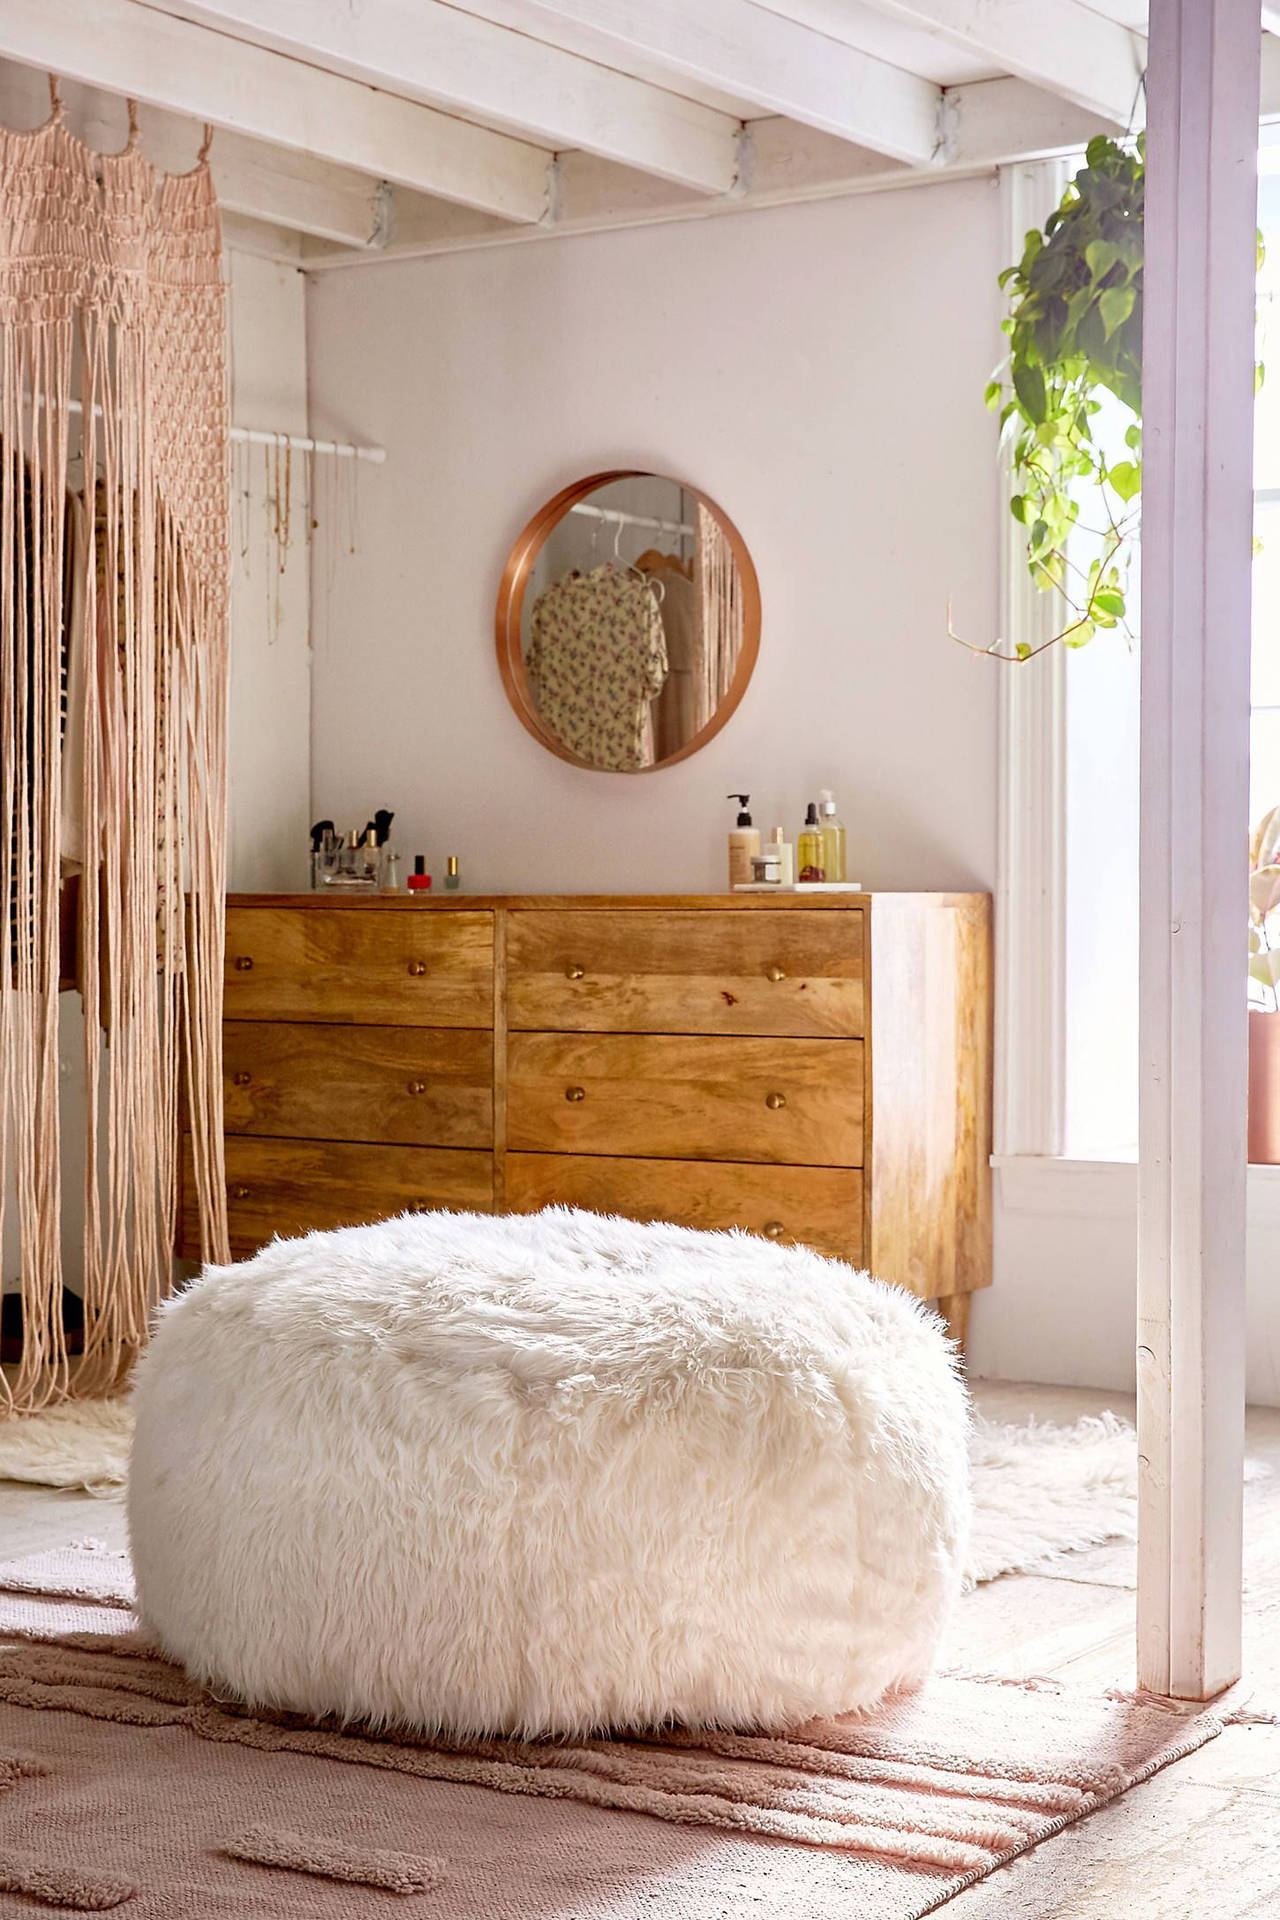 Round Fur Couch Inside A Stylish Room Background